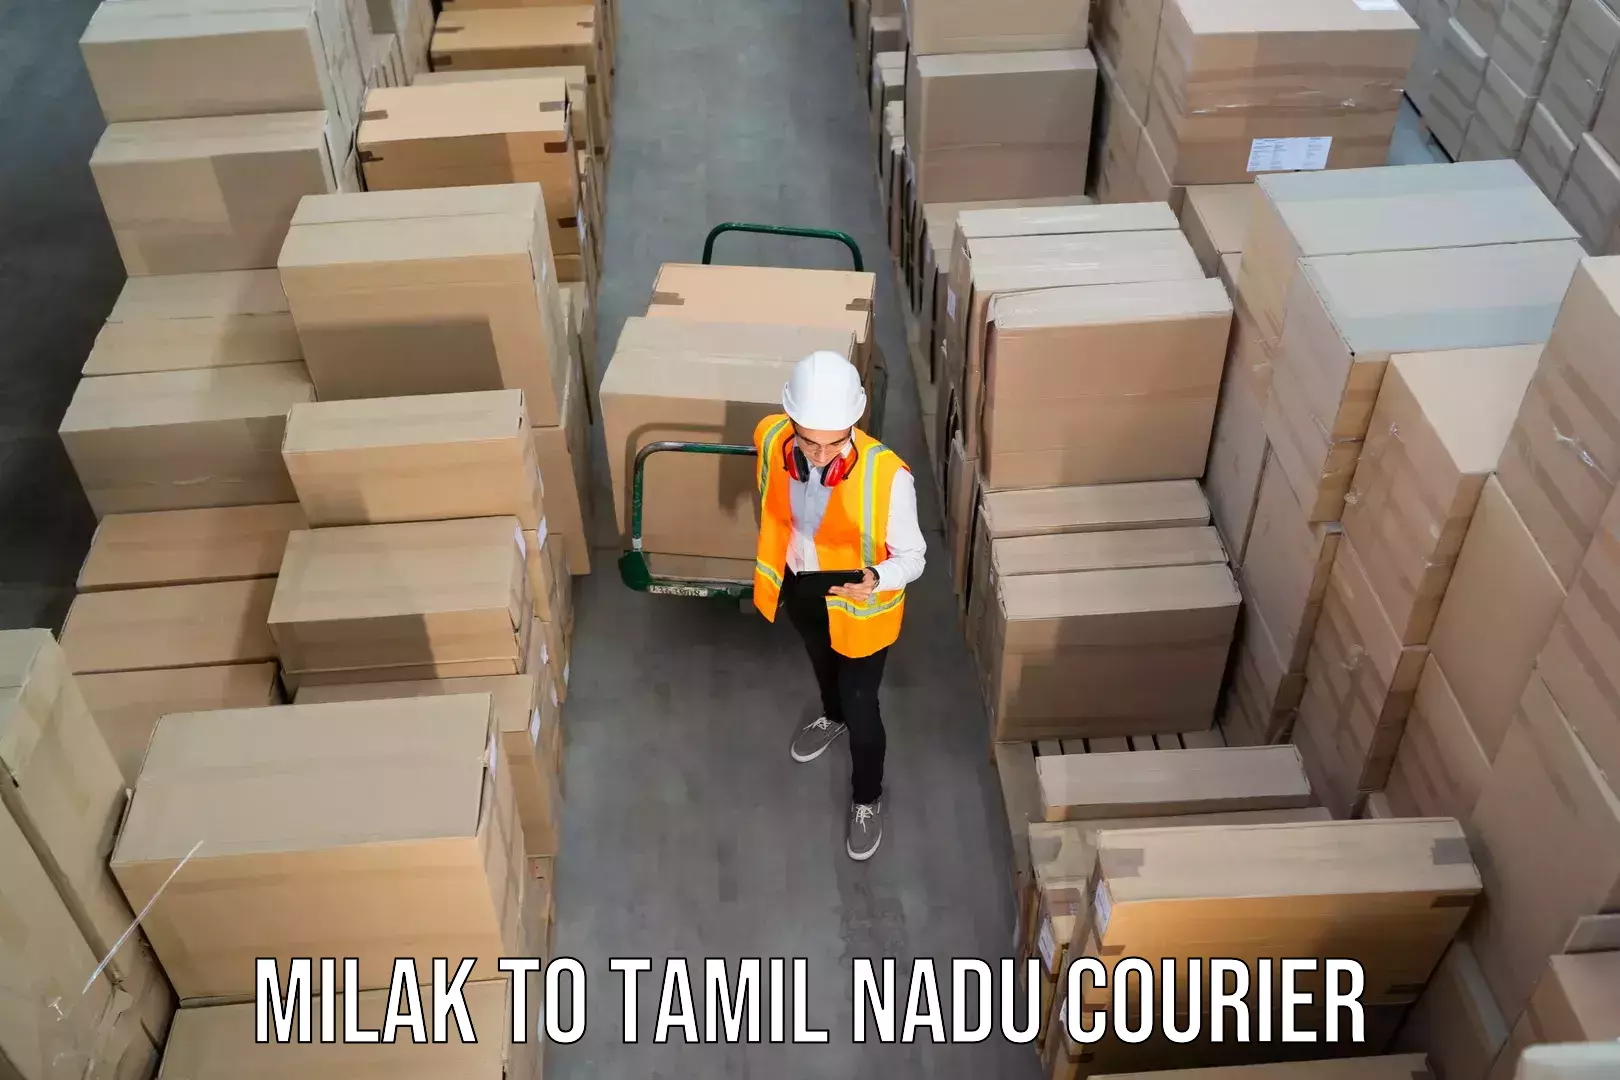 Full-service courier options Milak to Tamil Nadu